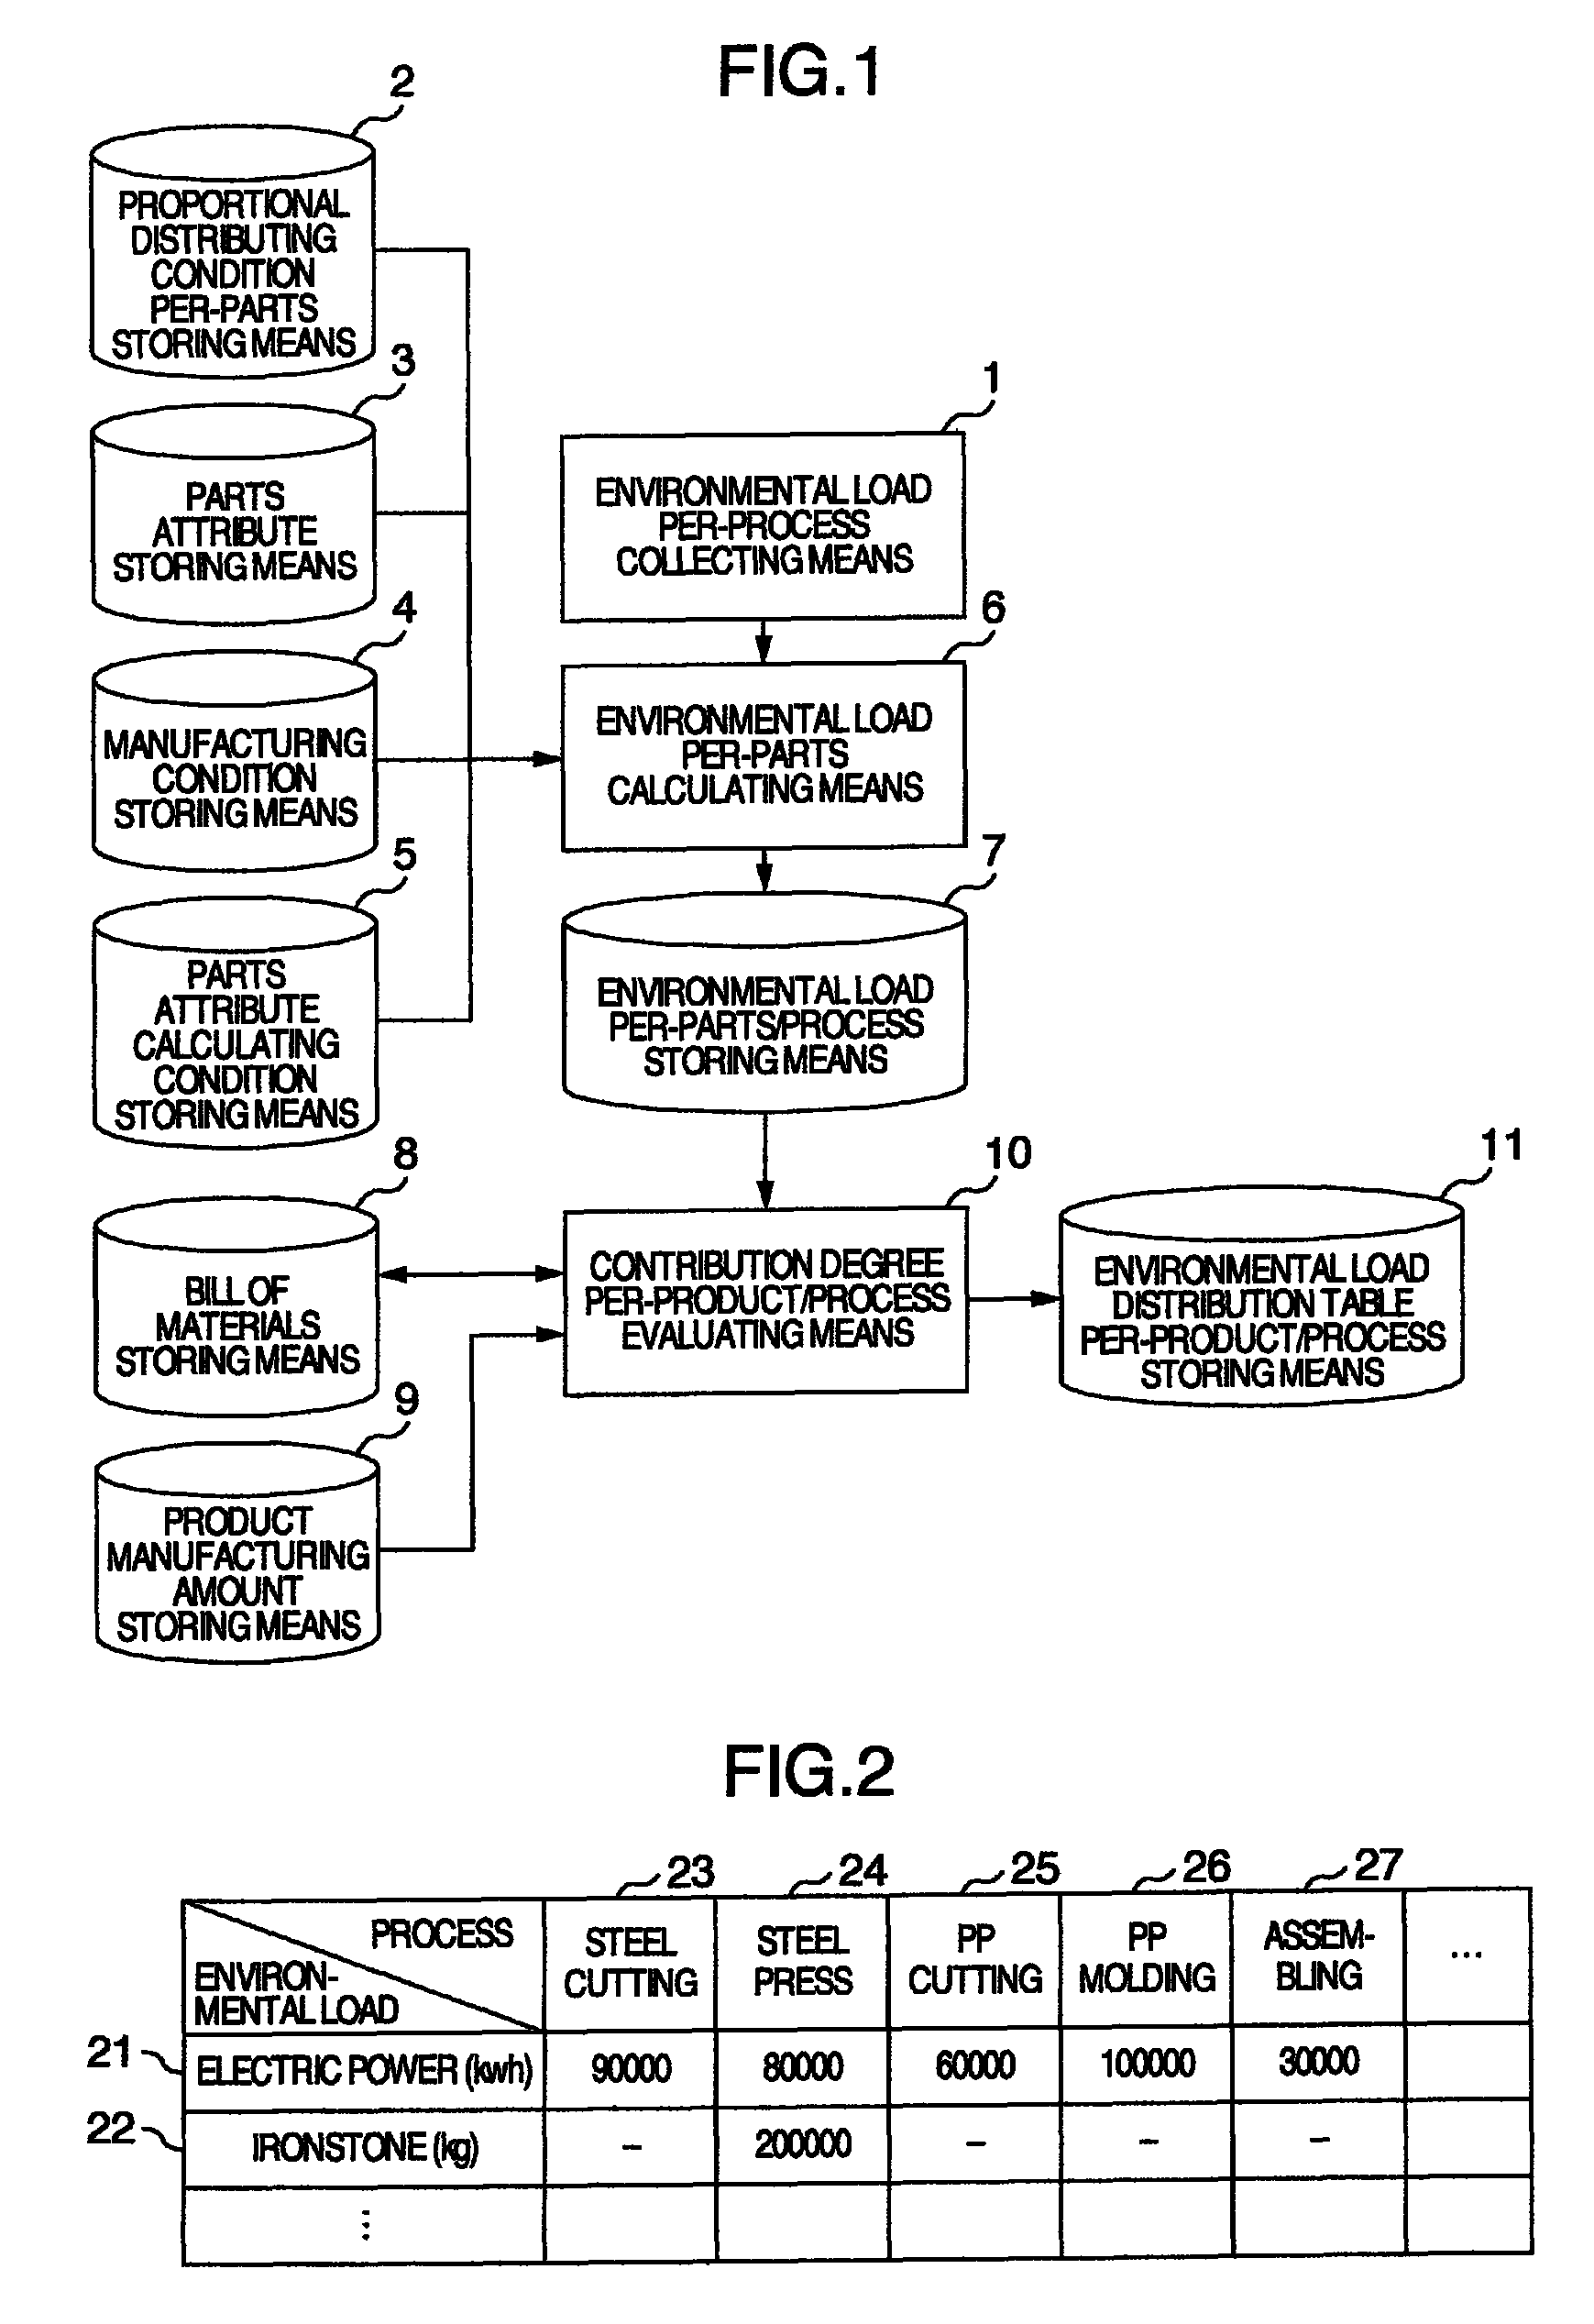 Apparatus for assisting decisions for improvement of environmental load